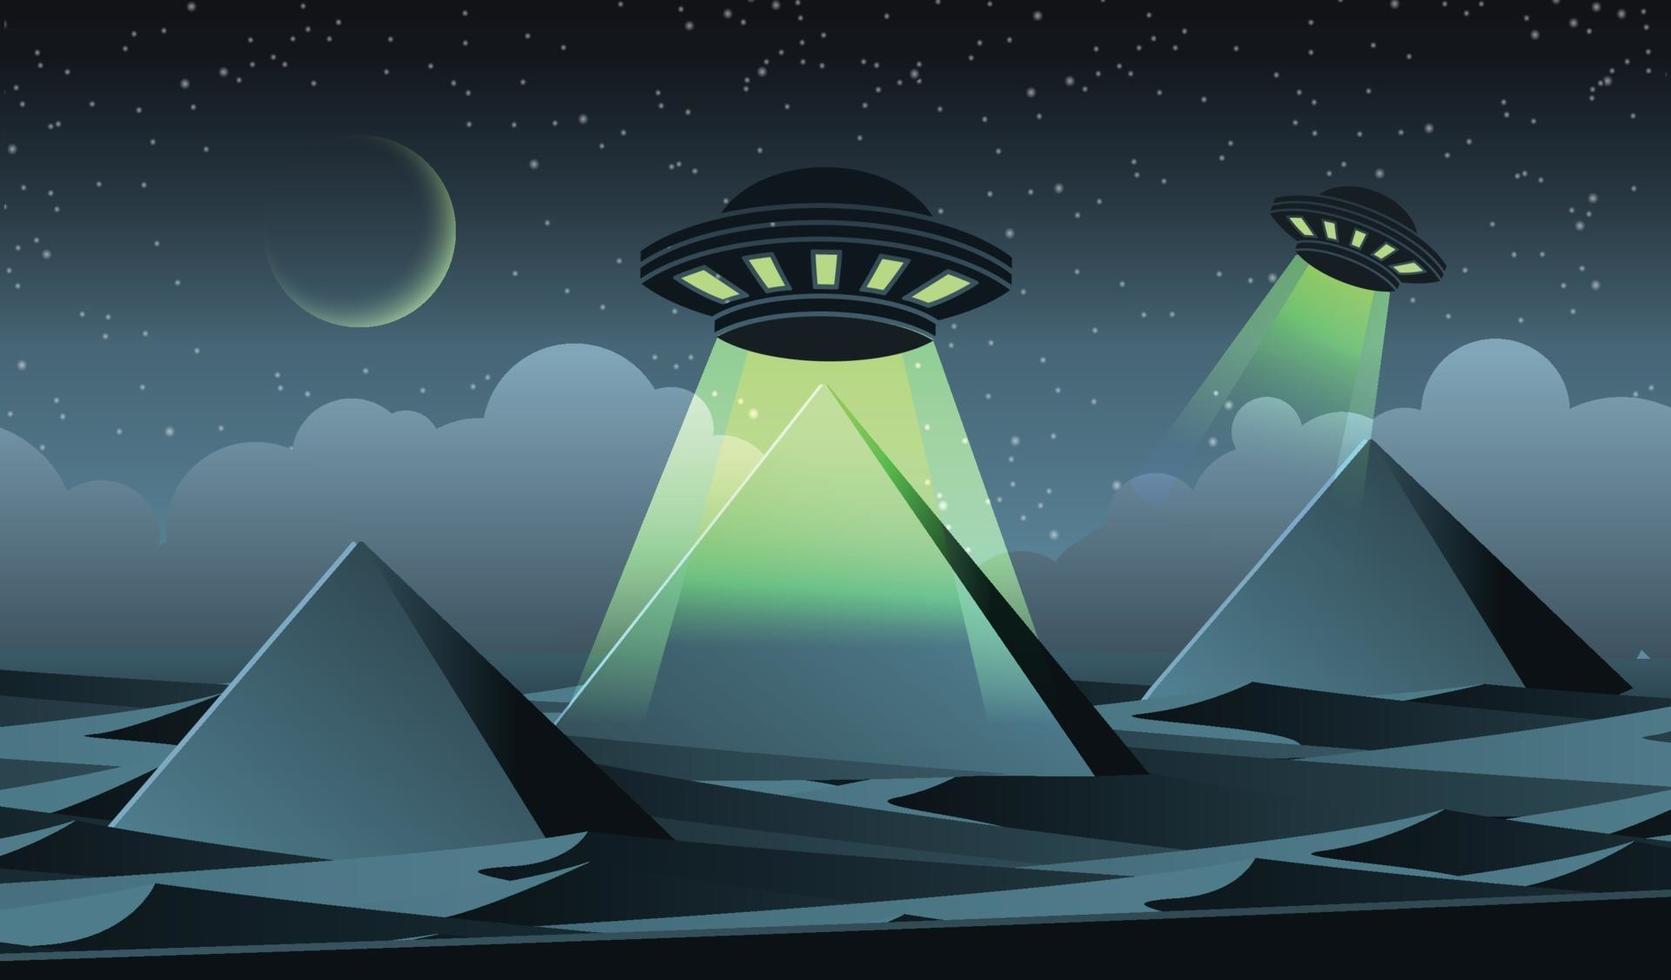 Cartoon version design of UFOs flying over Pyramids in Egypt vector